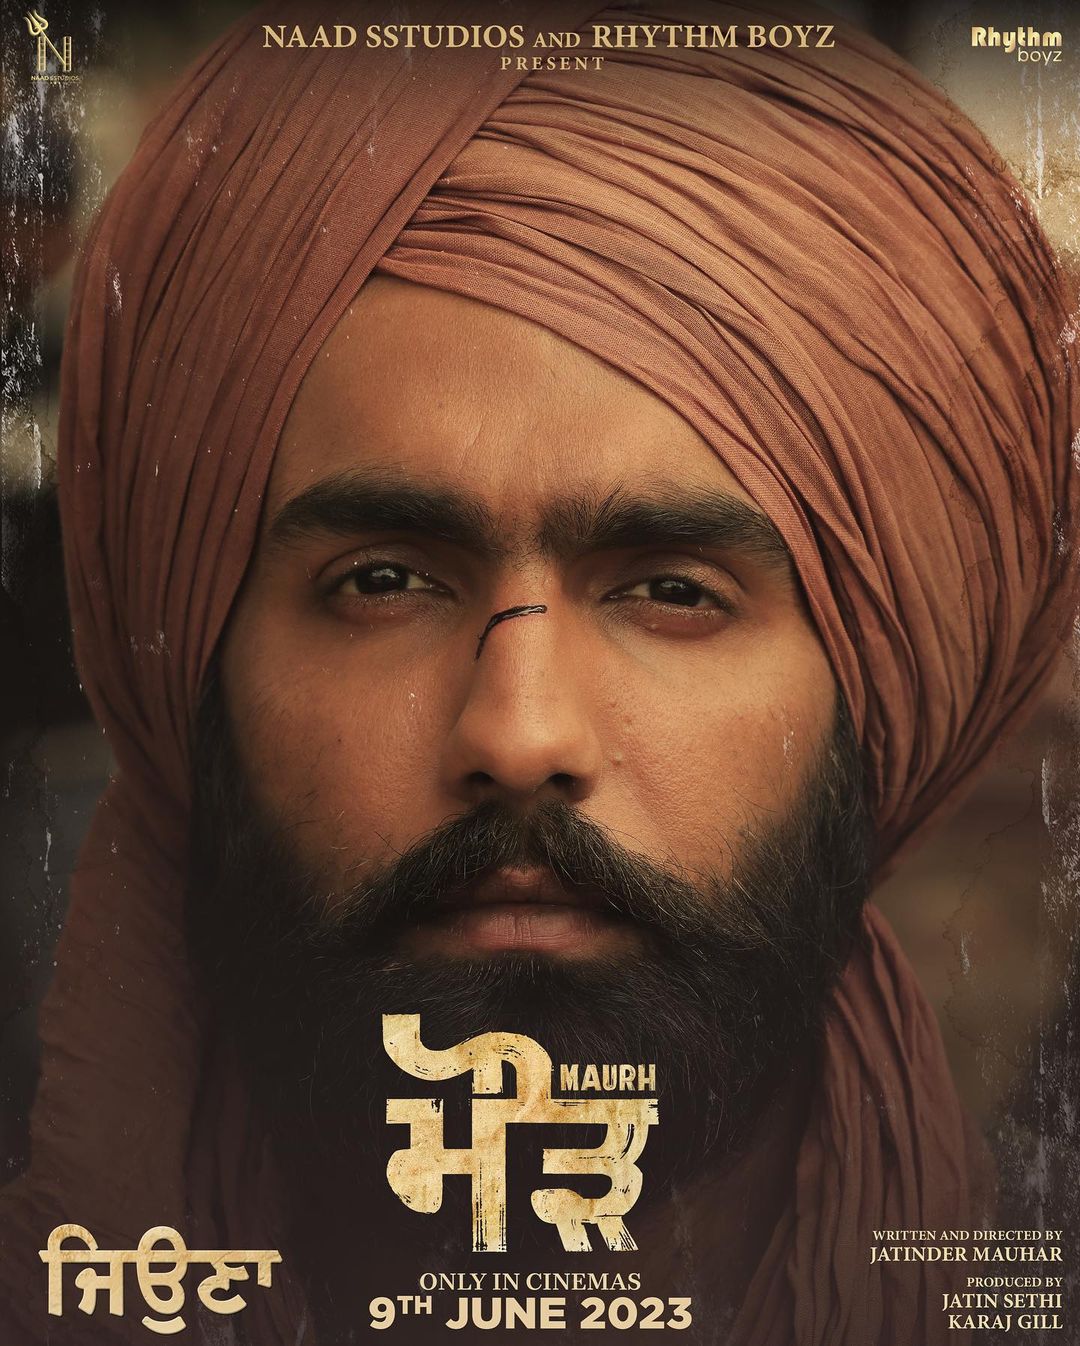 Maurh Movie (2023) Cast, Release Date, Story, Budget, Collection, Poster, Trailer, Review